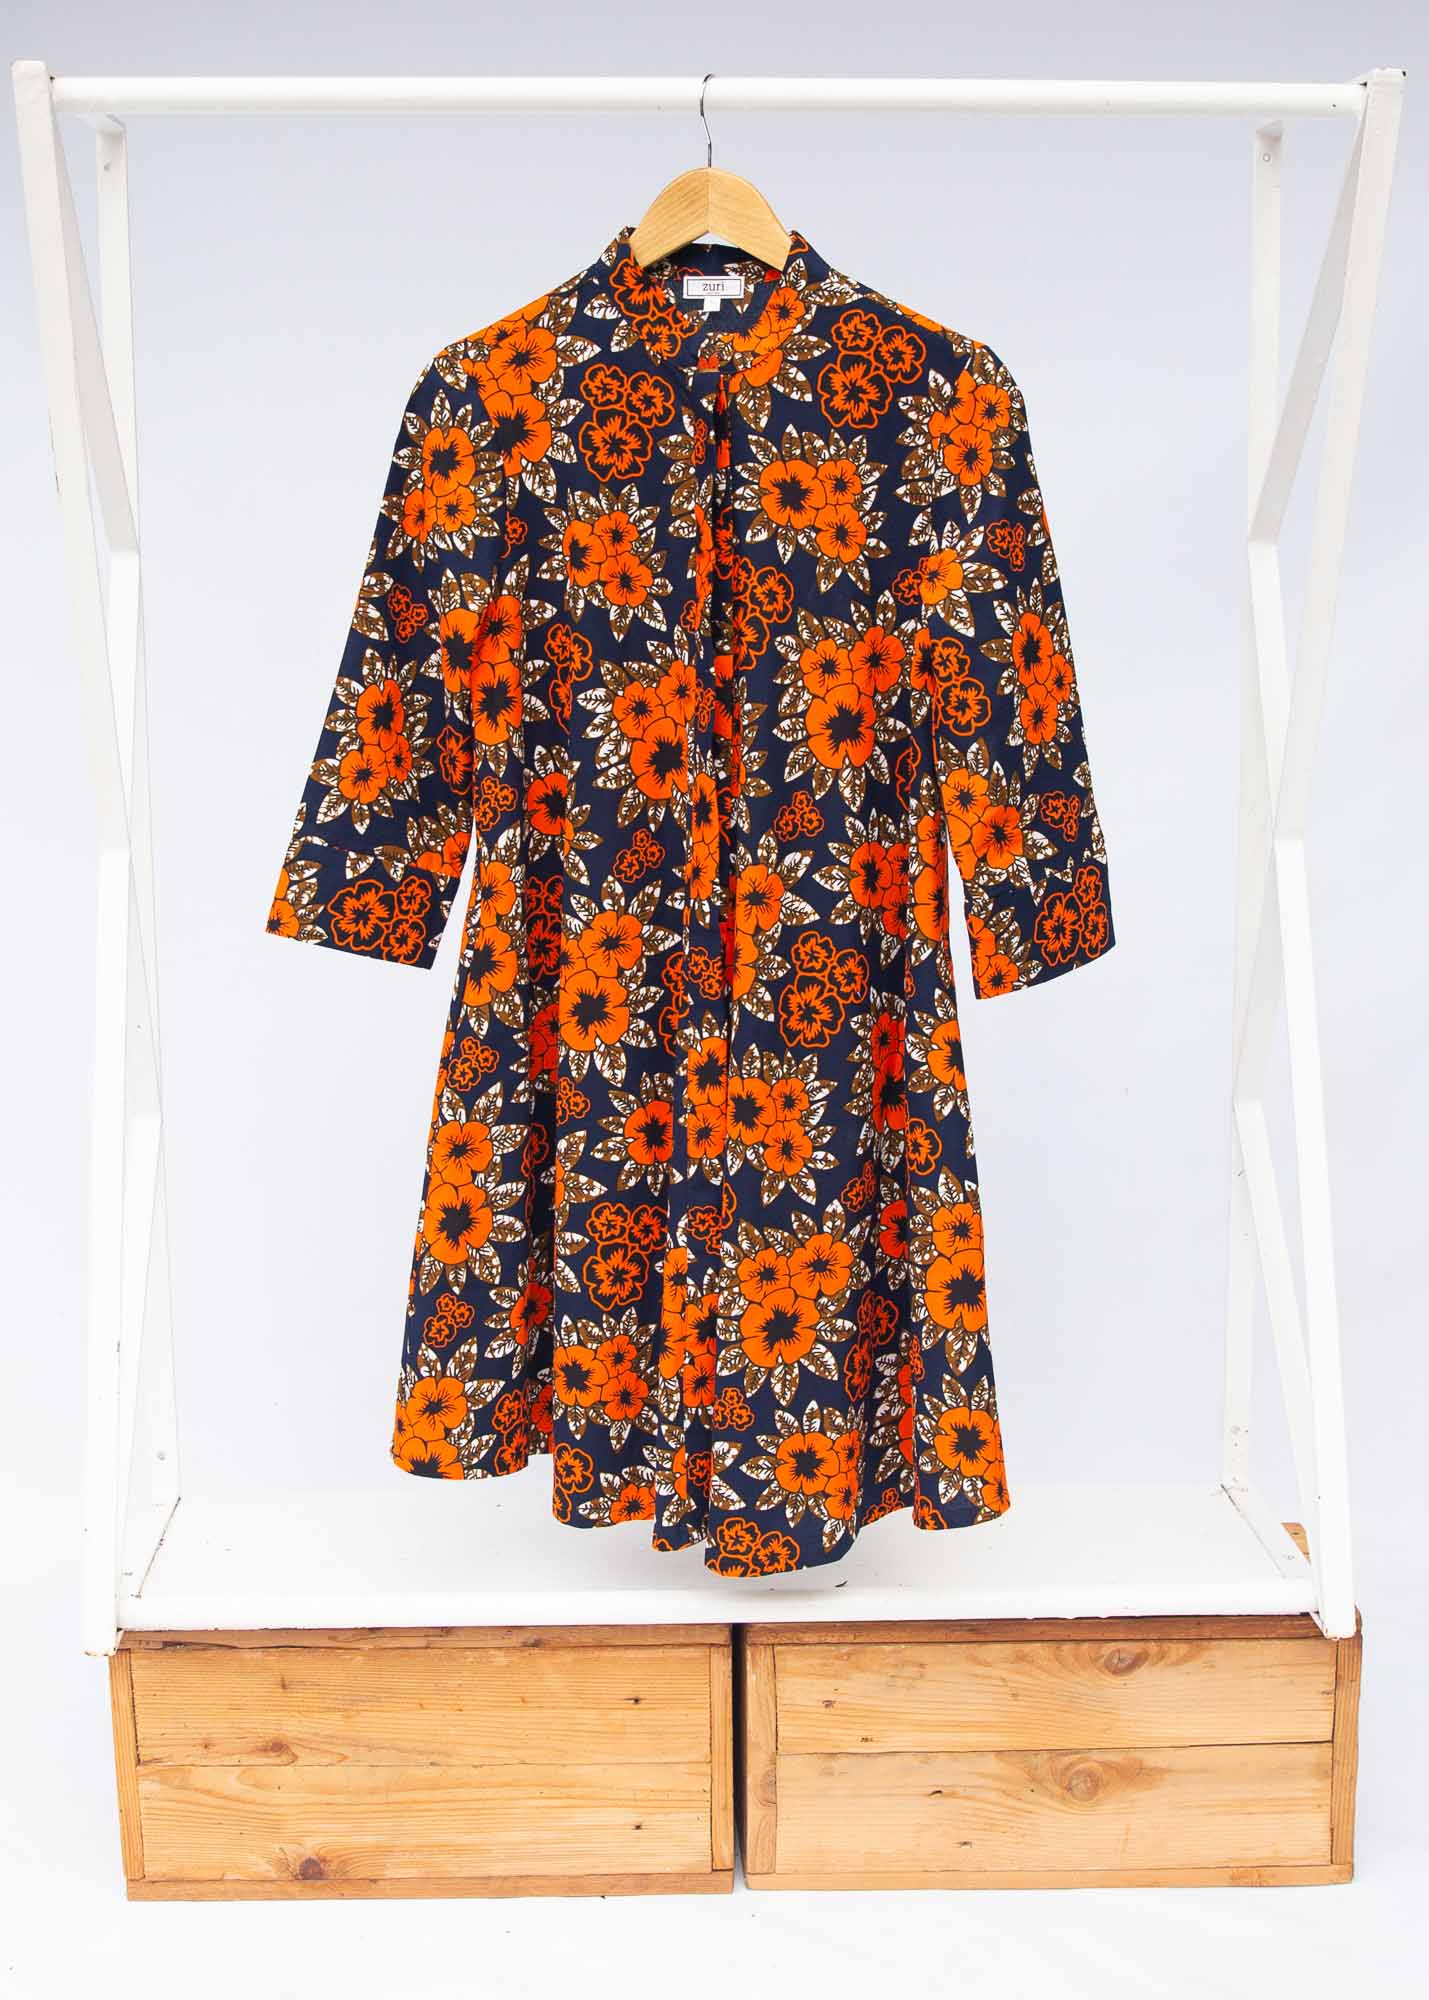 The display of navy dress with orange, brown, black and white floral print